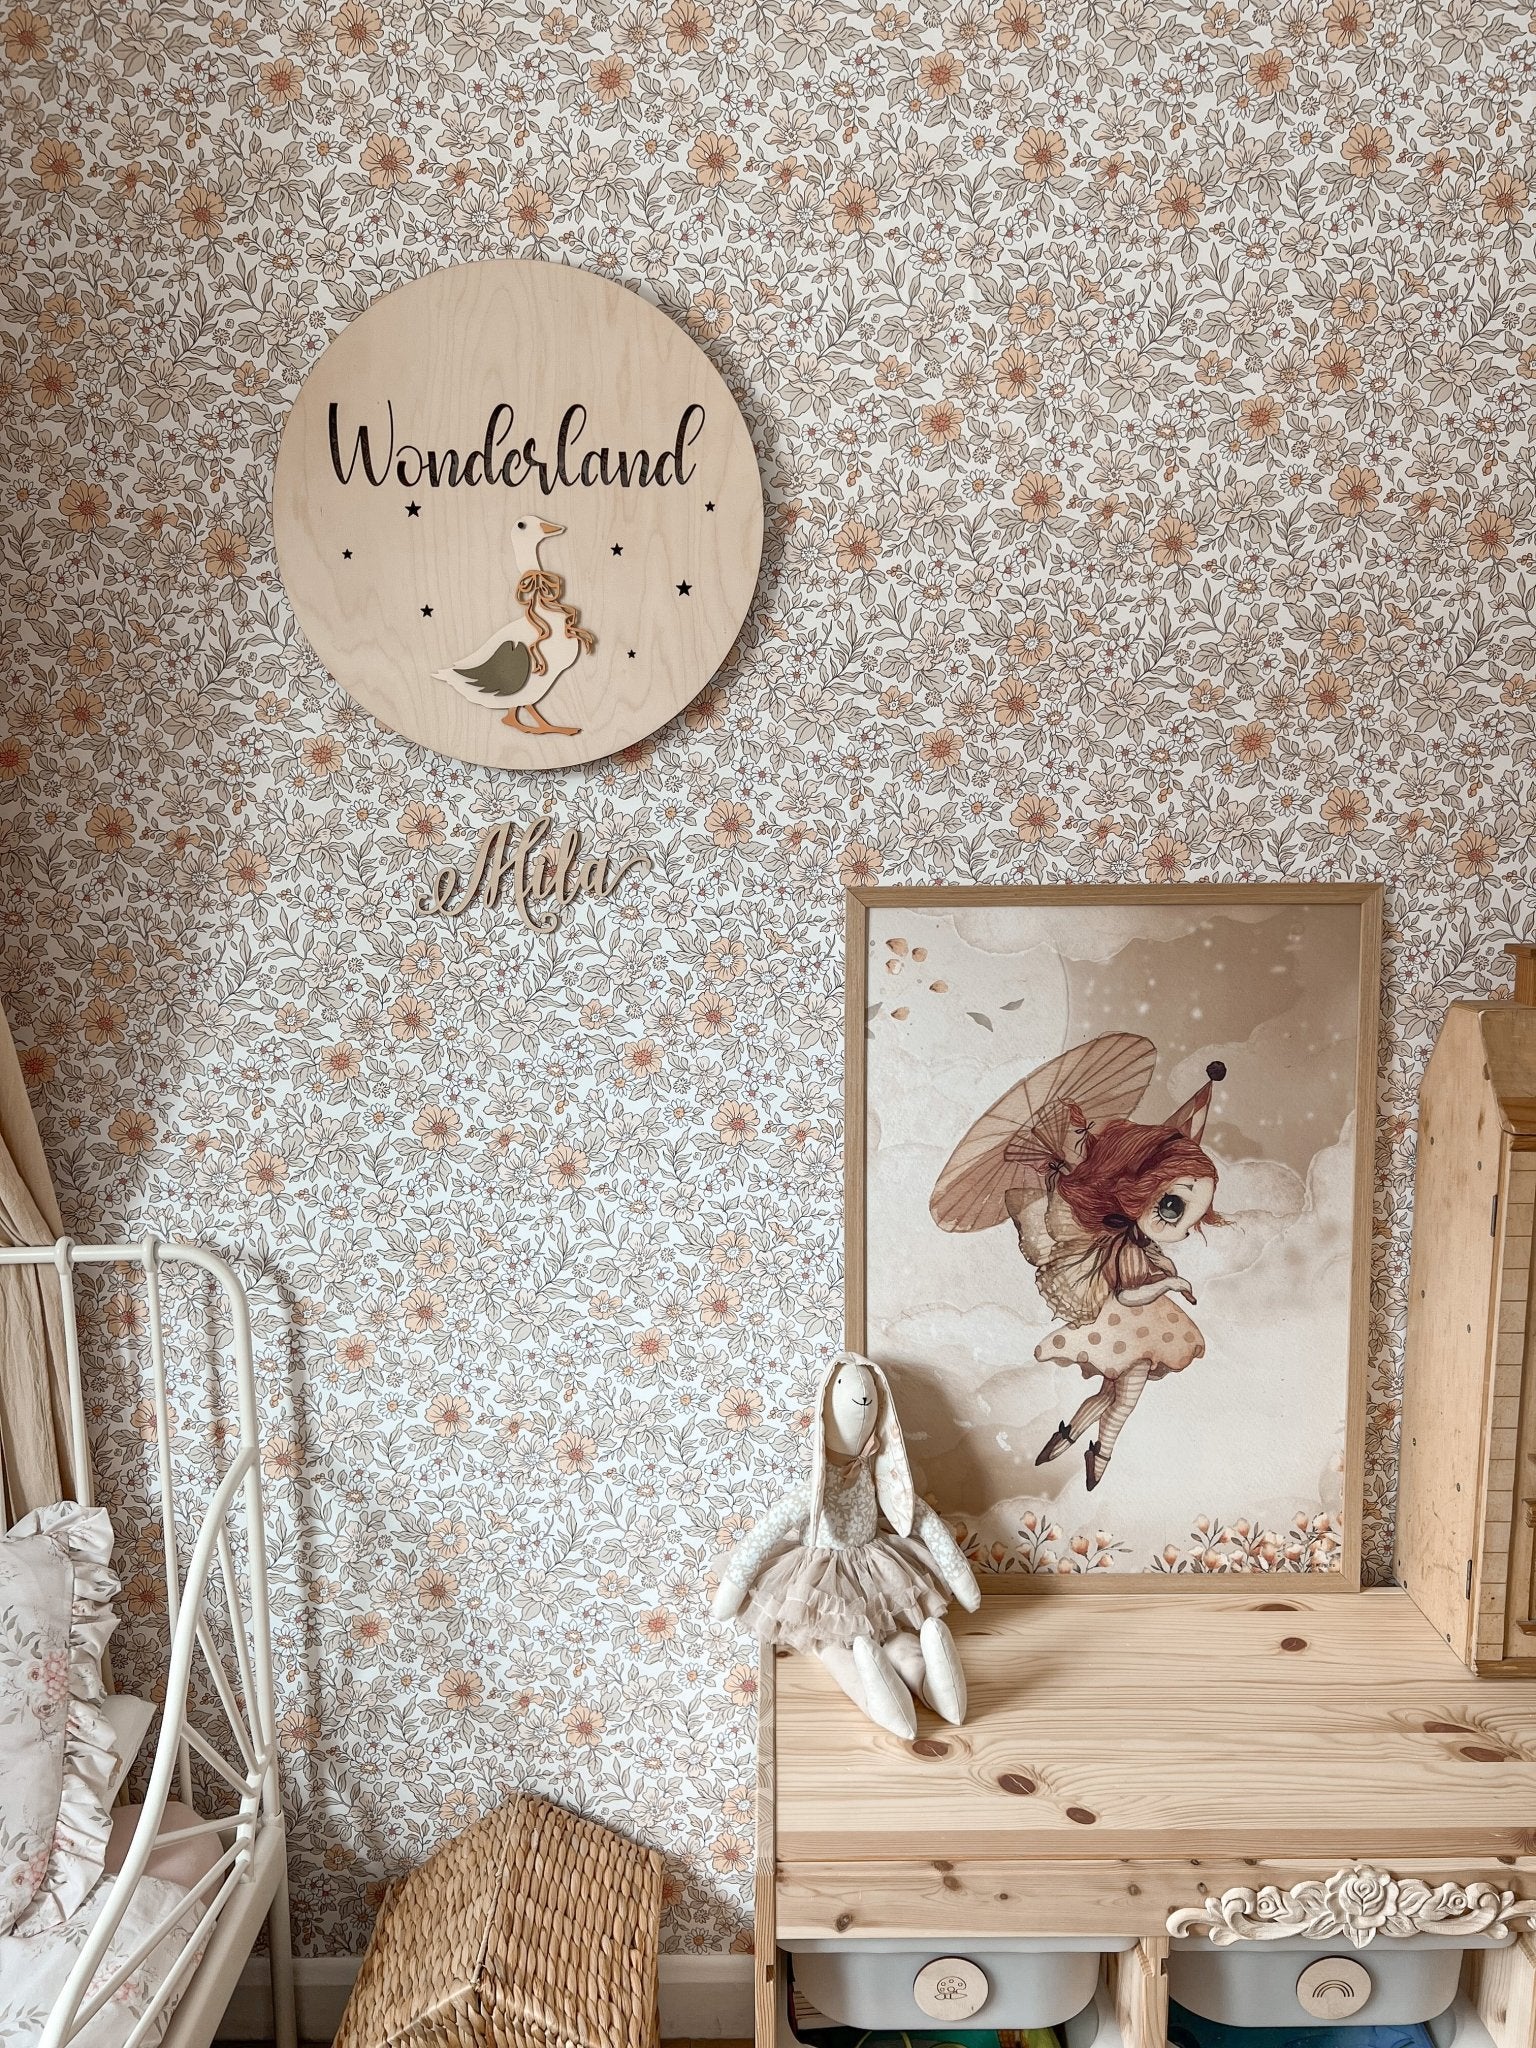 Neutral tone flower wallpaper, matches beautifully with natural wood decor in a children's room